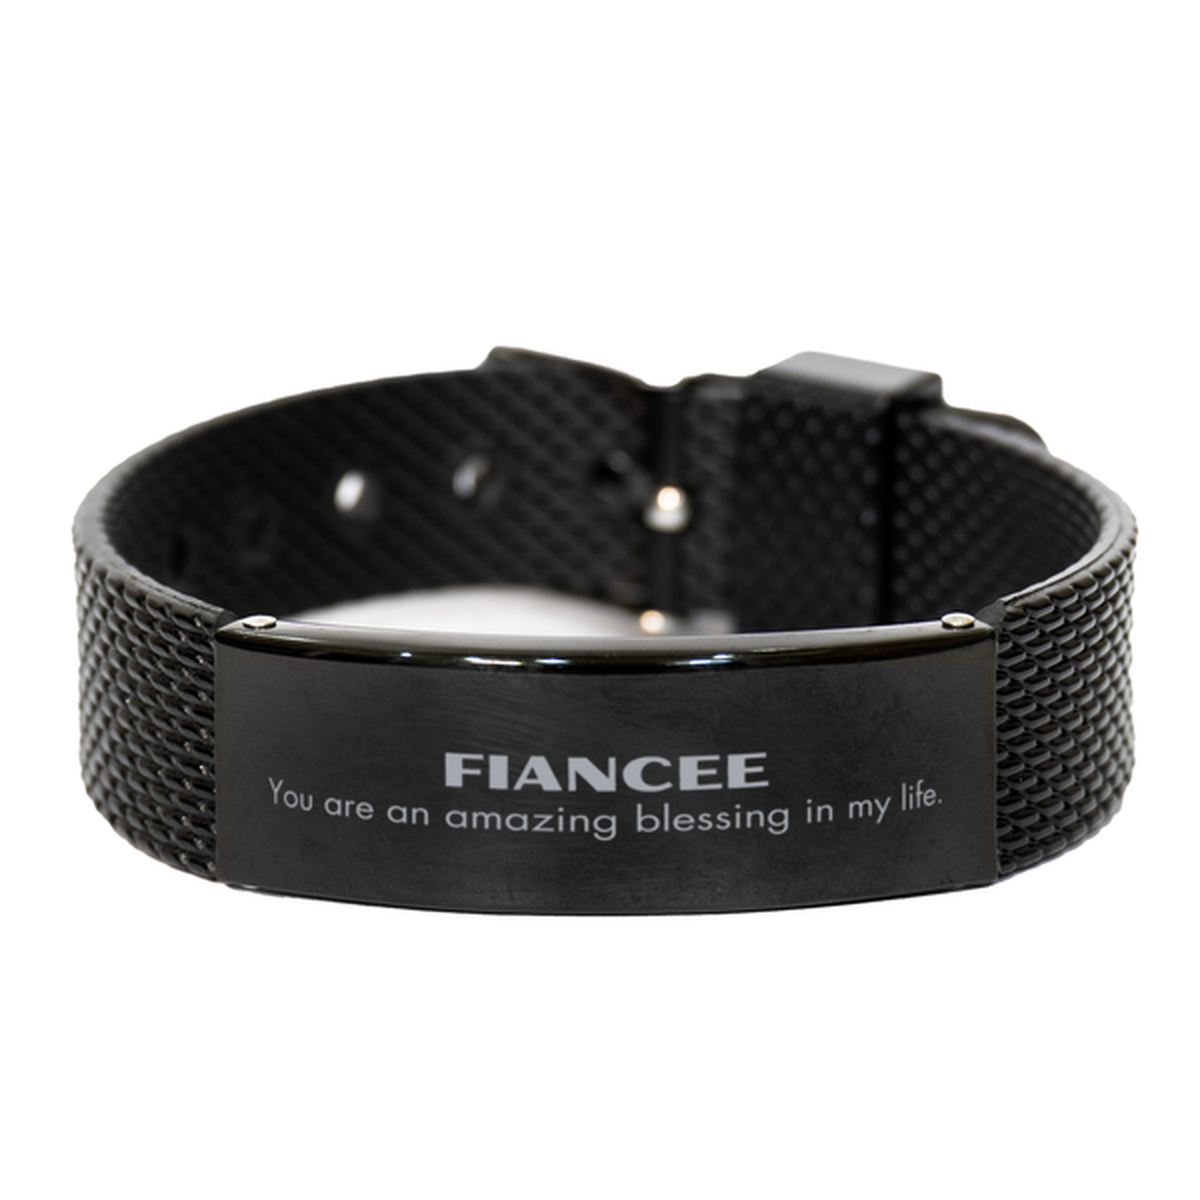 Fiancee Black Shark Mesh Bracelet, You are an amazing blessing in my life, Thank You Gifts For Fiancee, Inspirational Birthday Christmas Unique Gifts For Fiancee